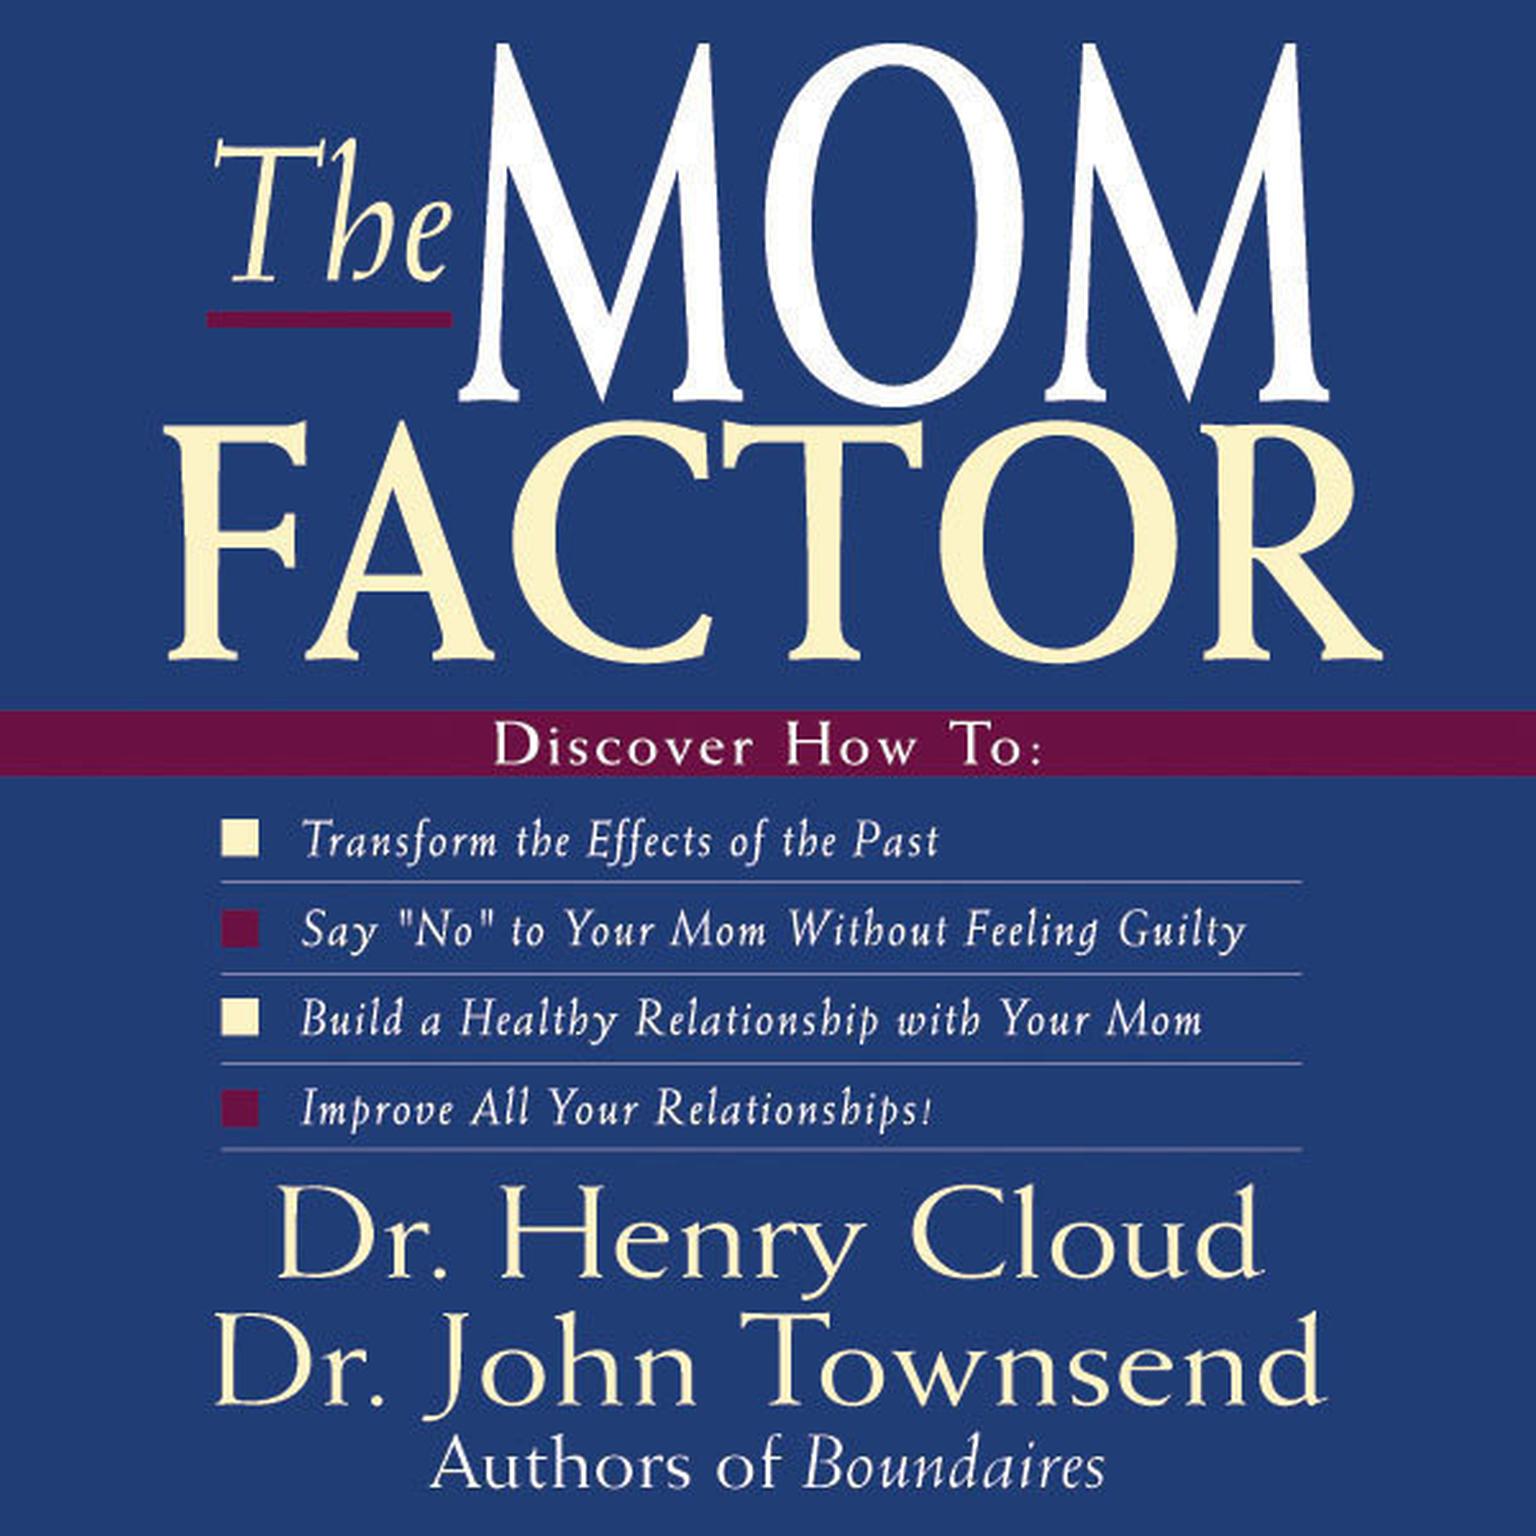 The Mom Factor (Abridged): Dealing with the Mother You Have, Didn’t Have, or Still Contend With Audiobook, by Henry Cloud